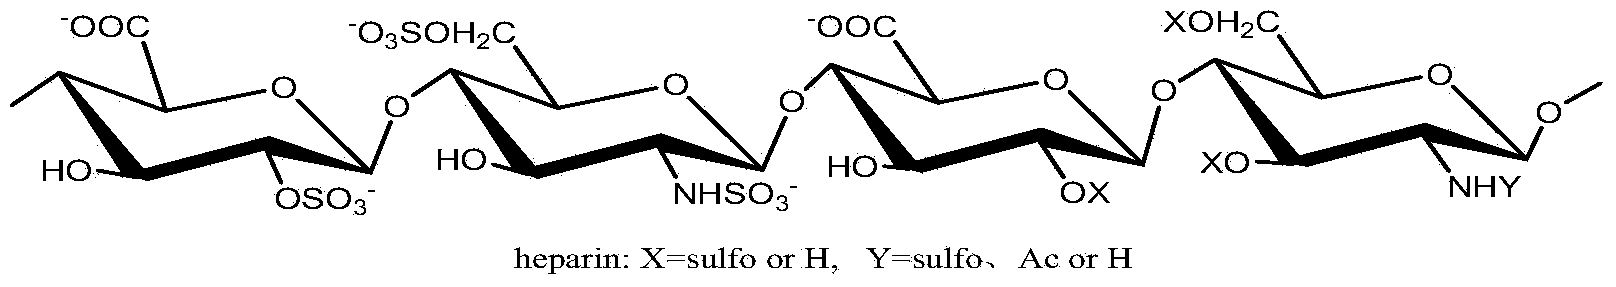 Synthesis method of 6-O-carboxymethyl chitosan sulfuric sulfation product